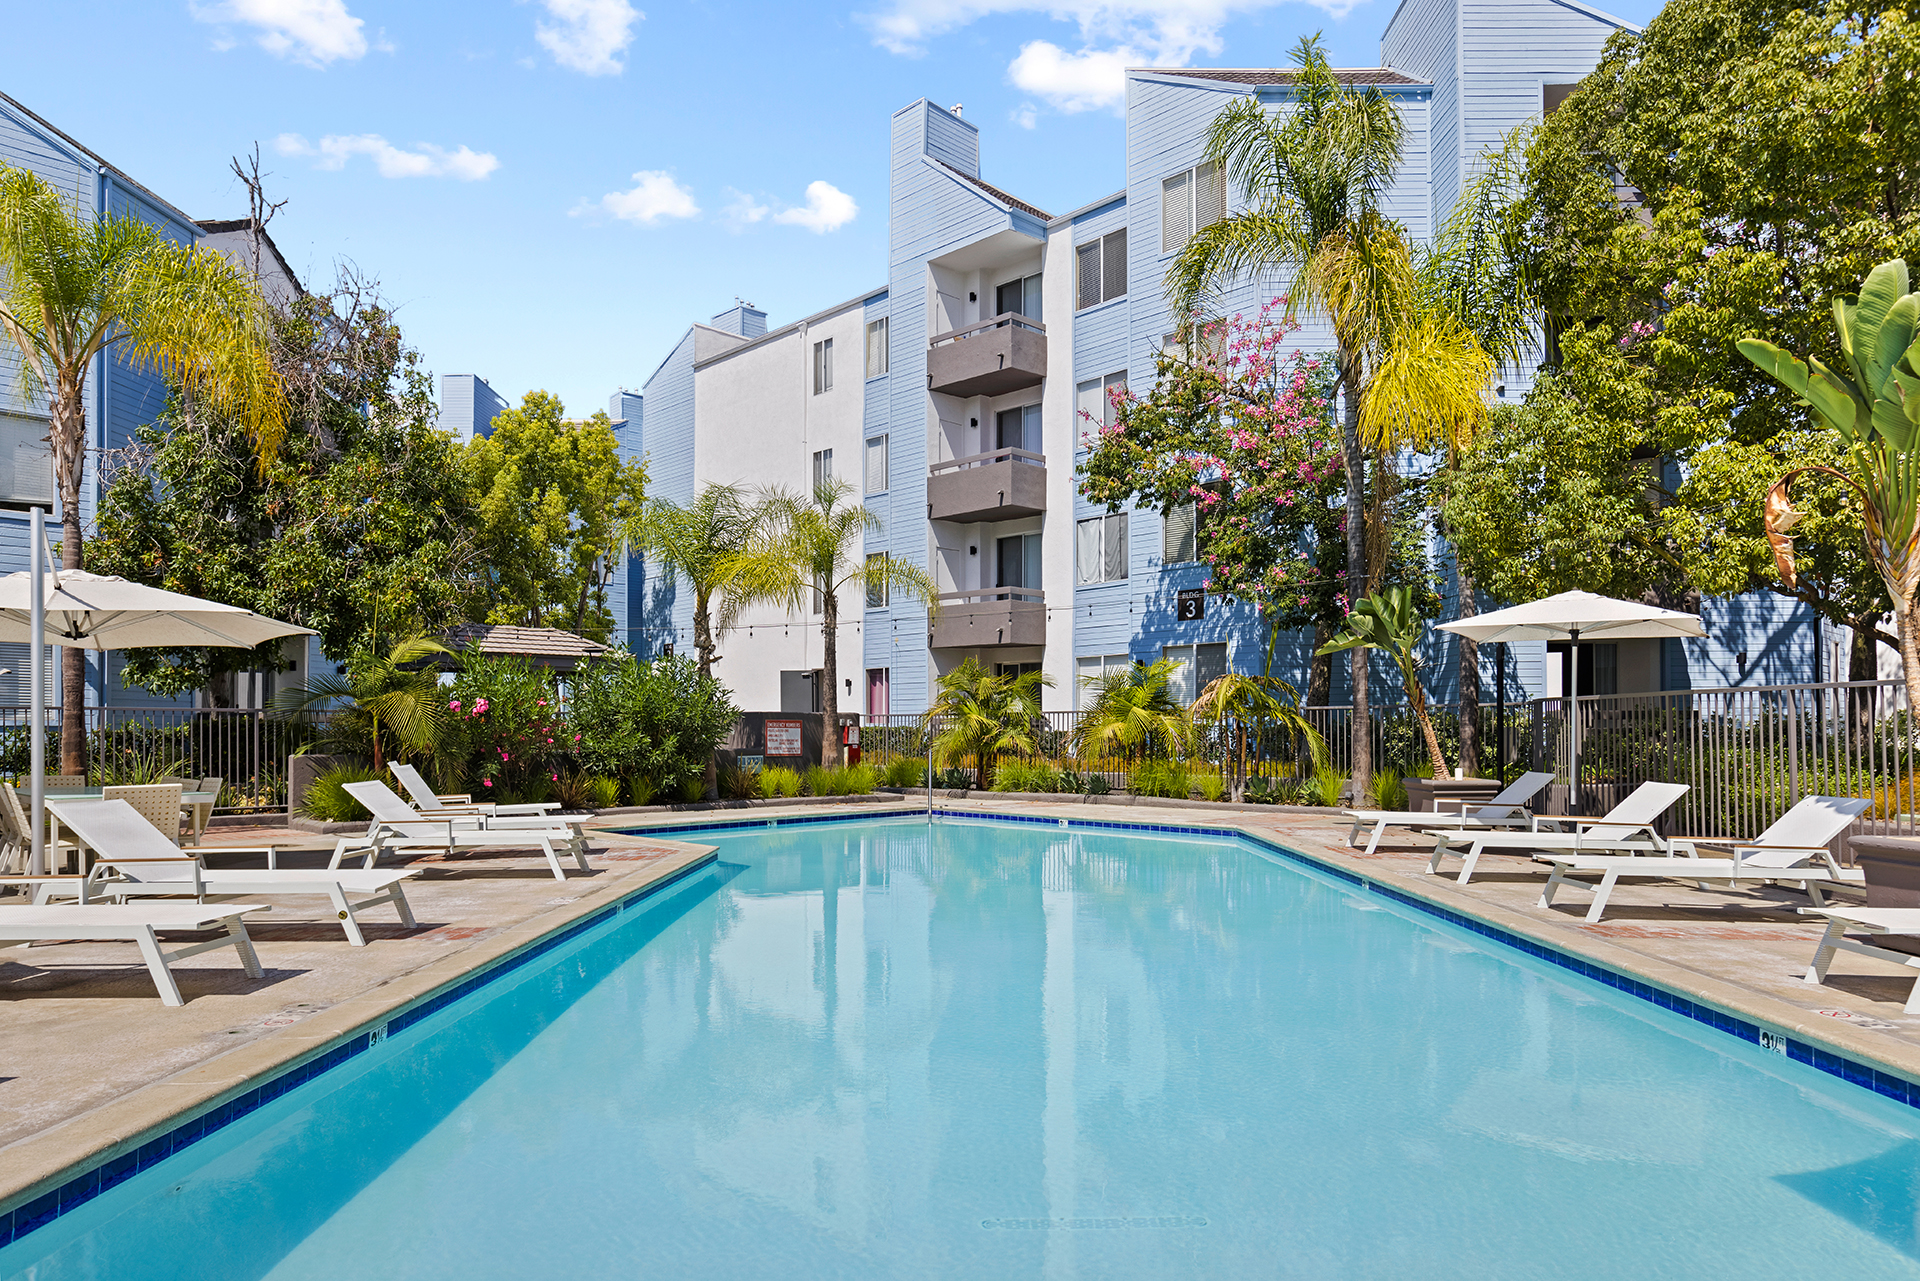 Pool photo of The Enclave Apartments in Paramount, CA